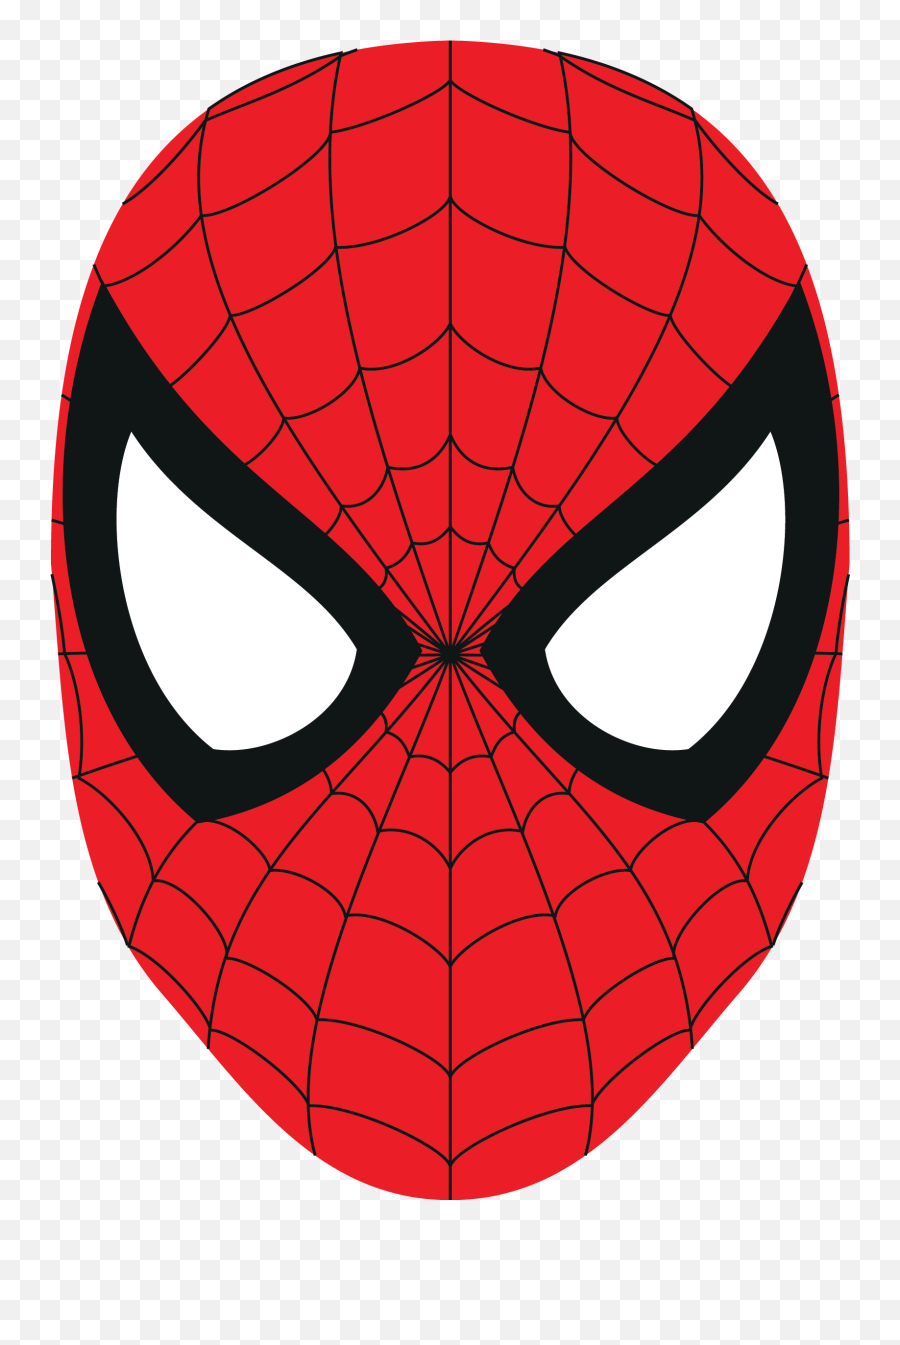 Spiderman Face Cartoon Png - Spiderman Face,Spiderman Face Png